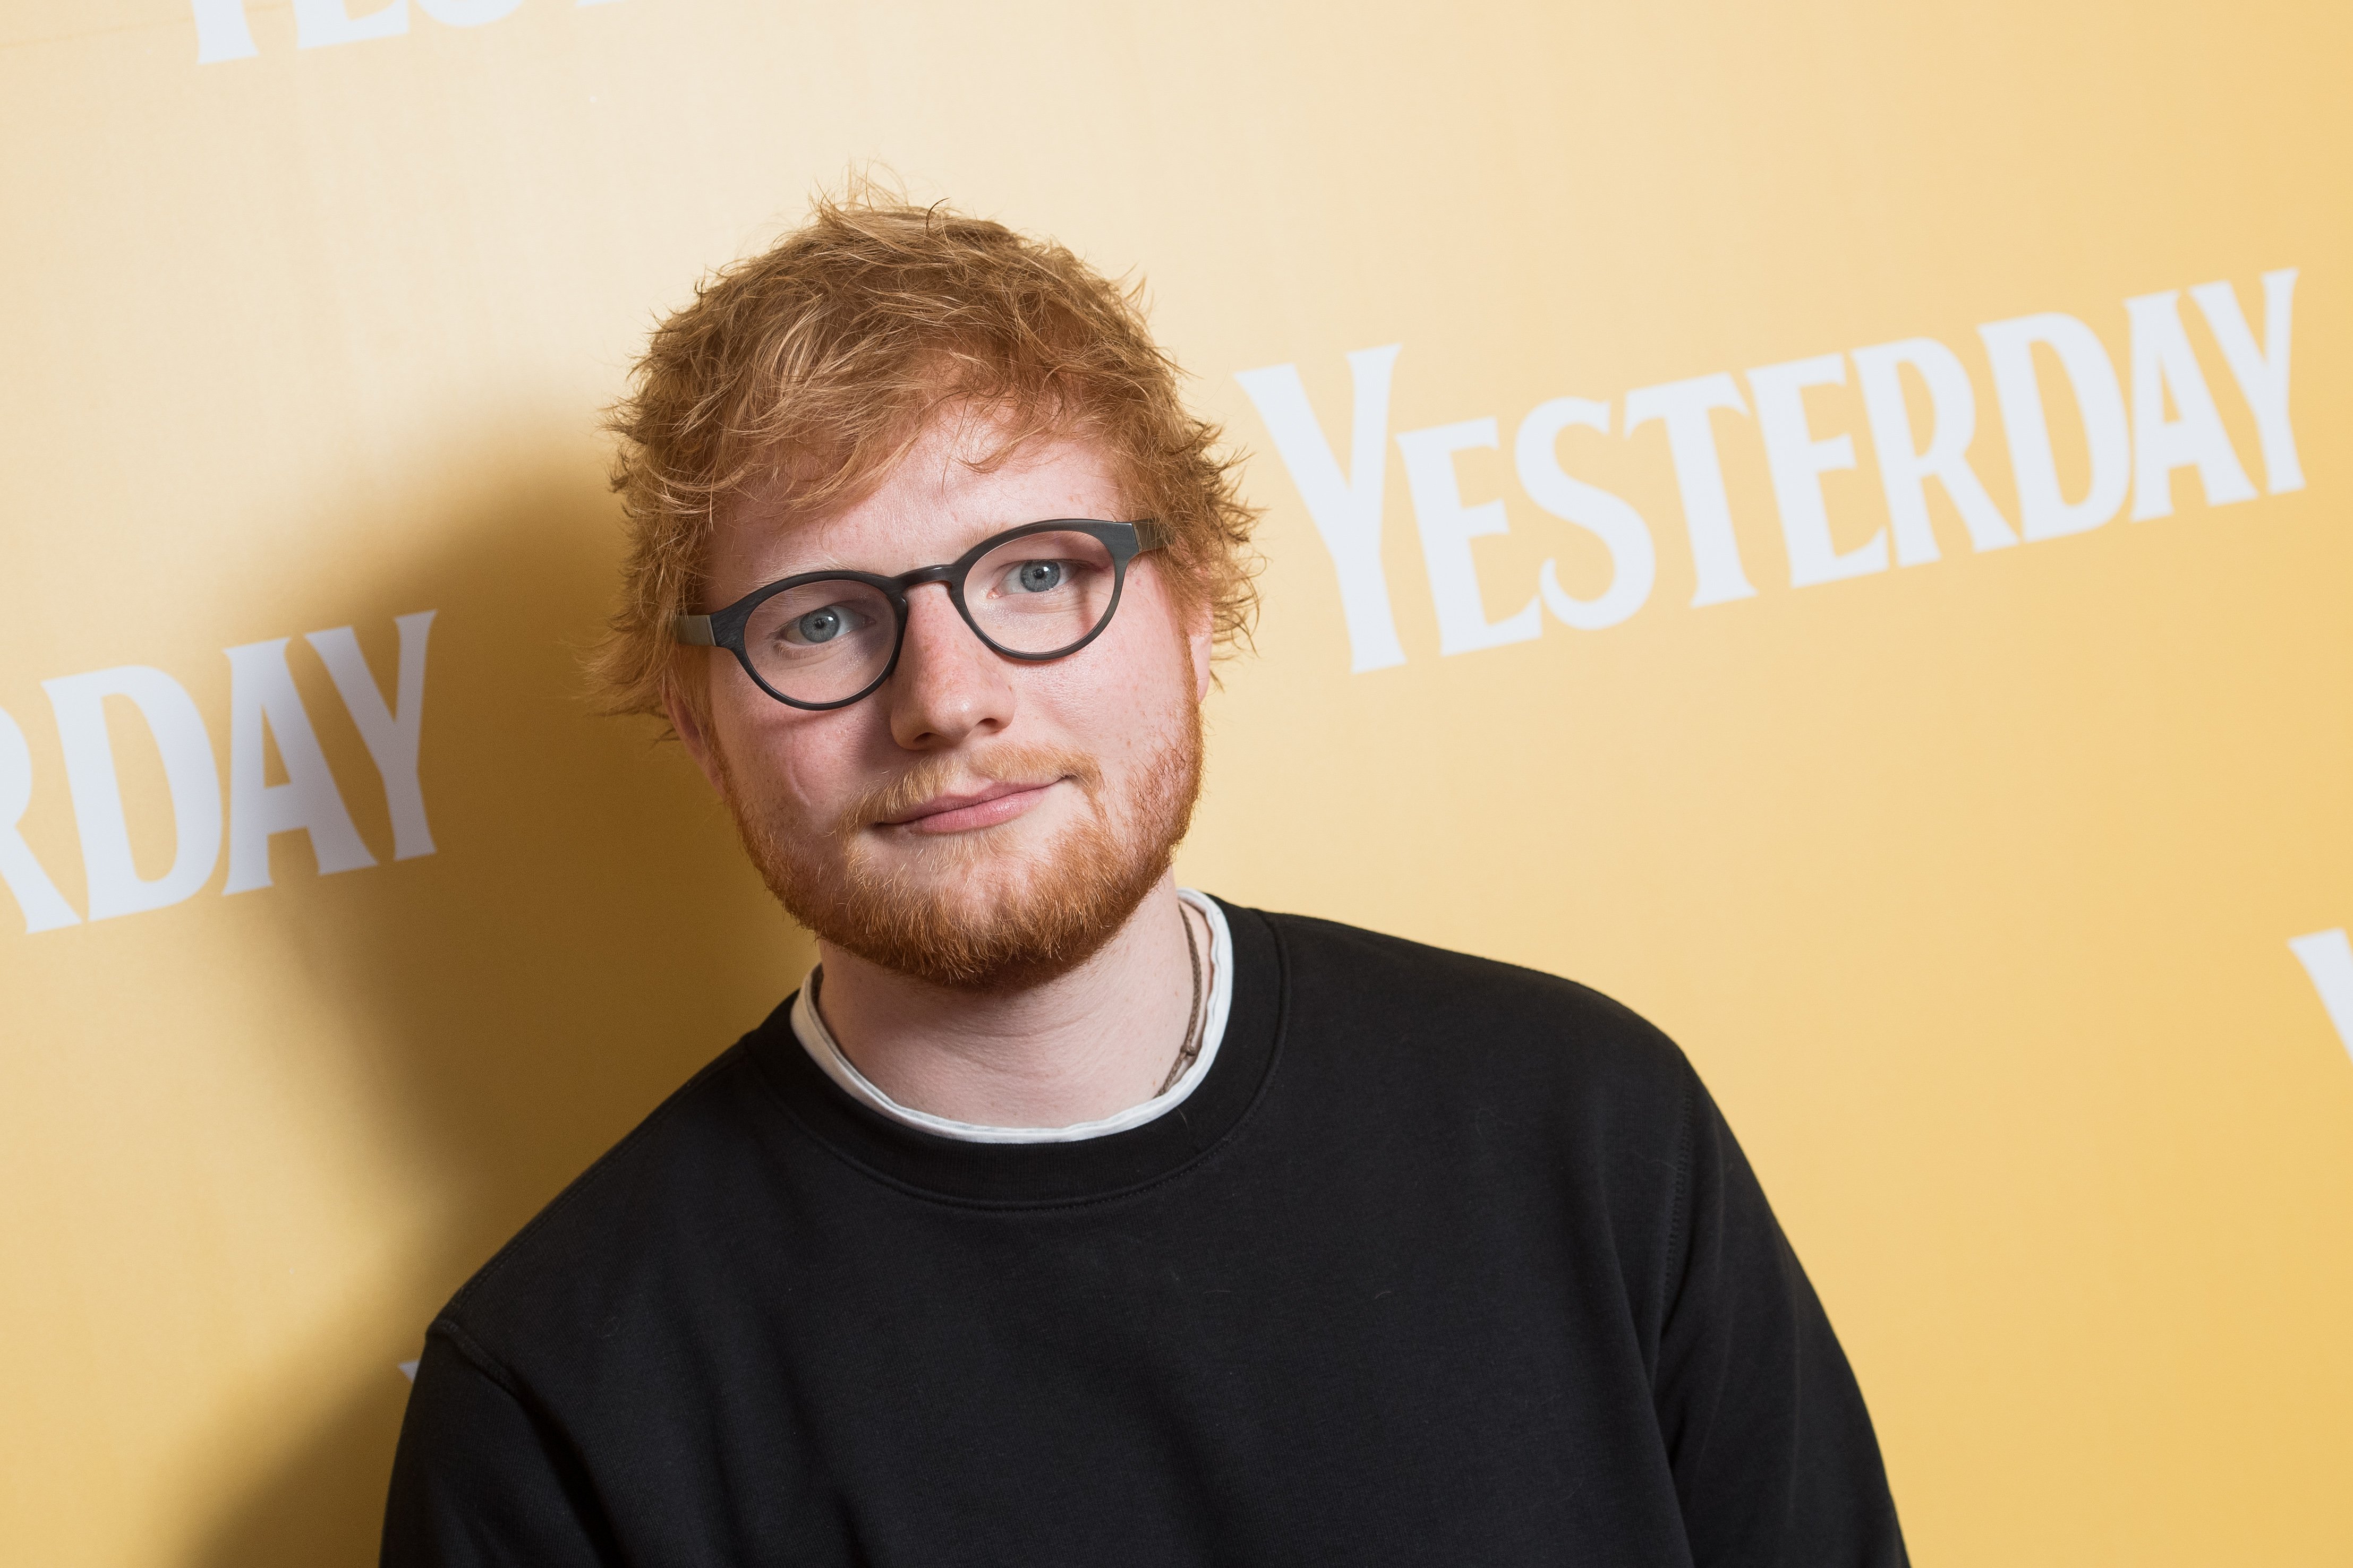 Ed Sheeran at the special screening of "Yesterday" on June 21, 2019 in Gorleston-on-Sea, England. | Photo: Getty Images